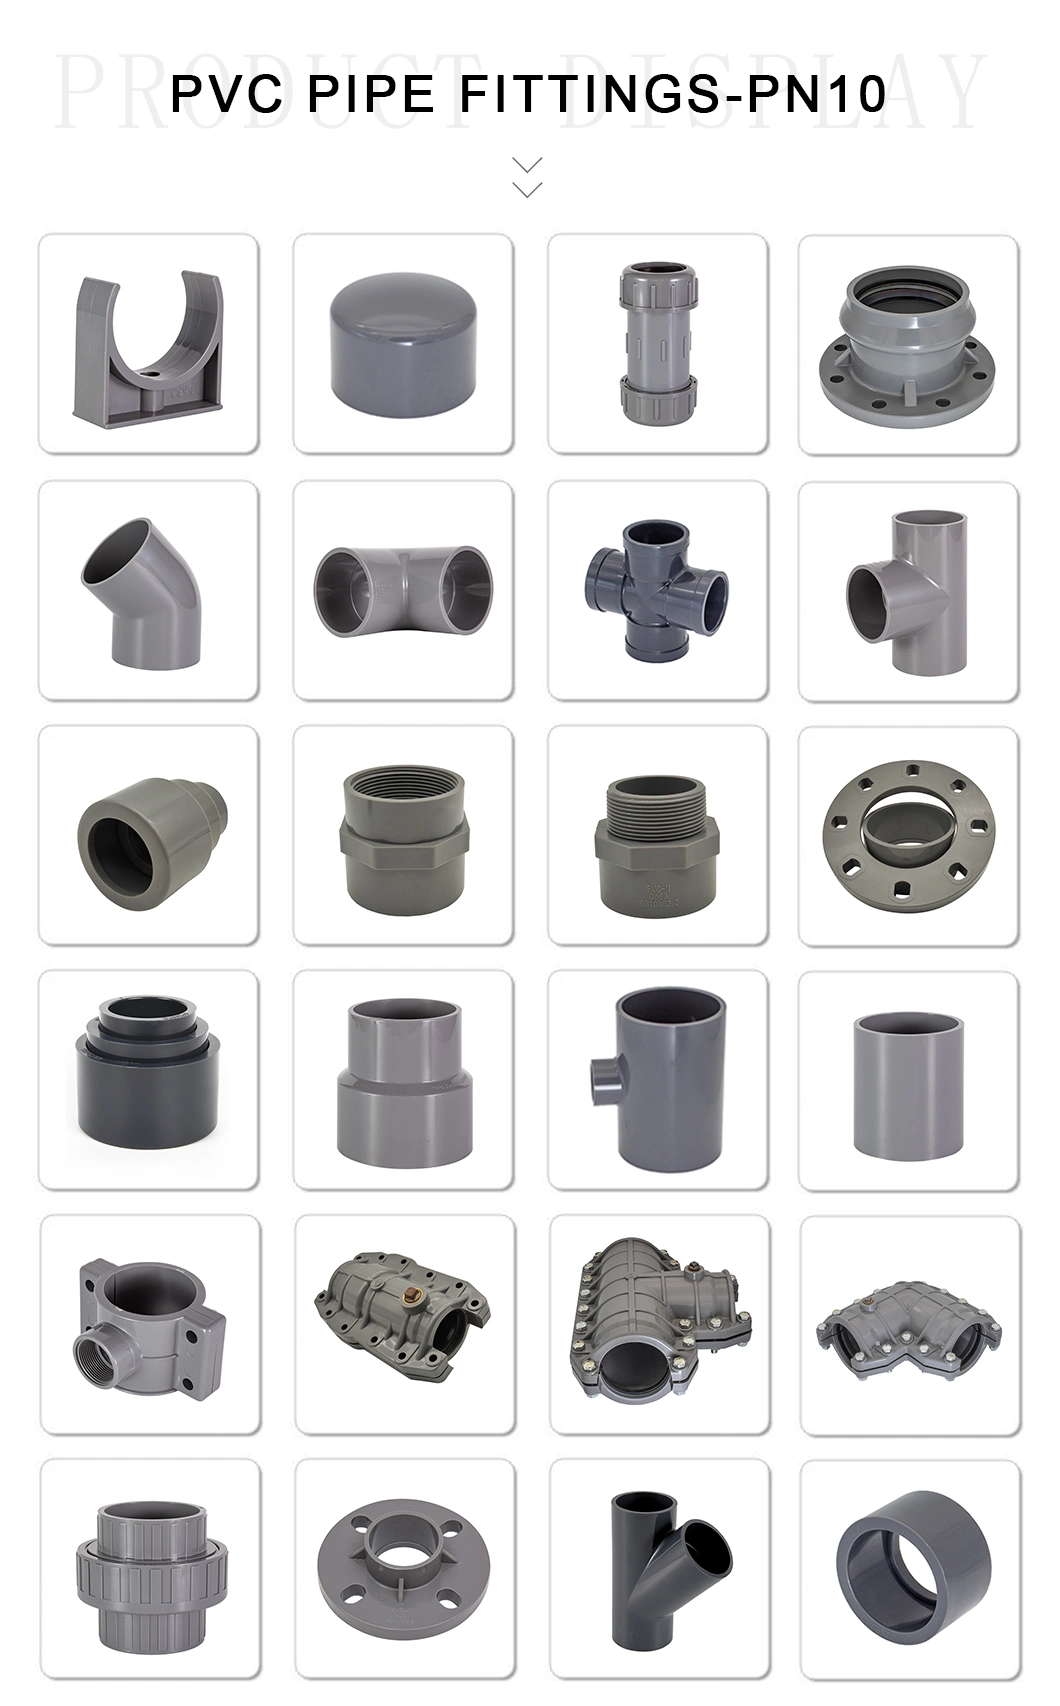 High Quality PVC Pipe Fittings-Pn10 Standard Plastic Pipe Fitting Round Cap for Water Supply